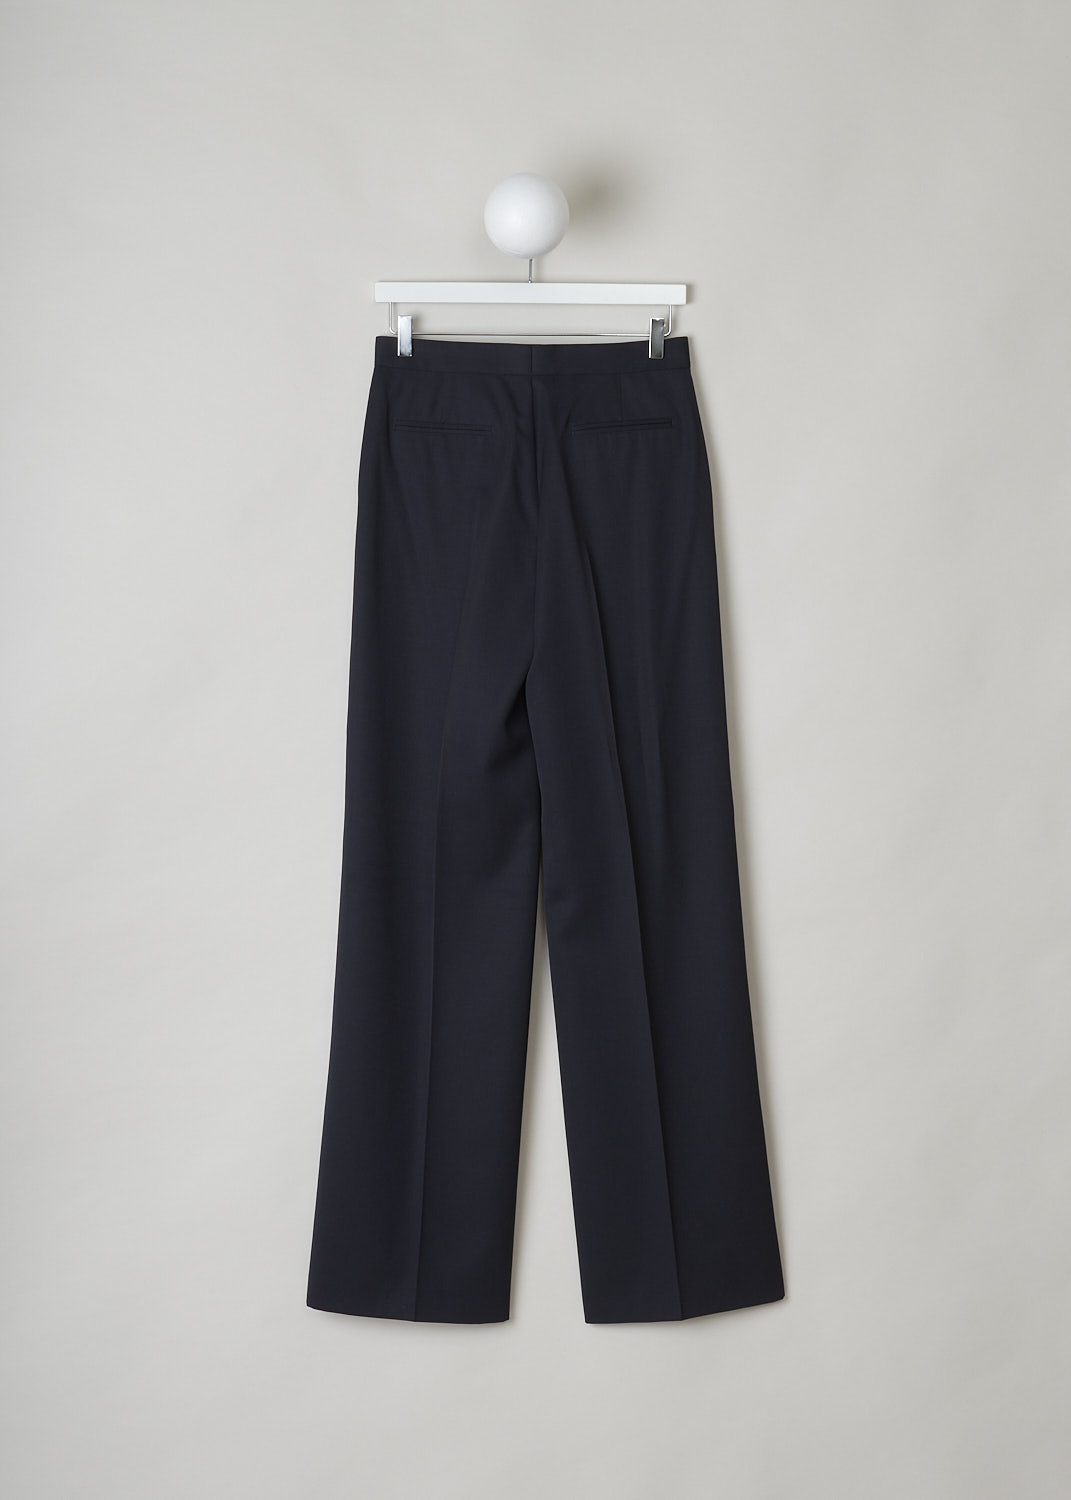 JIL SANDER, MIDNIGHT BLUE WIDE-LEG PANTS, JSPN302220_WN200300_402, Blue, Back, These navy blue wool pants have a narrow waistband with, attached in the front, a narrow belt-like band with a concealed button closure. These pants have a concealed clasp and button closure. The wide pant legs have pressed creases. These pants have slanted pockets in the front and welt pockets in the back. 
